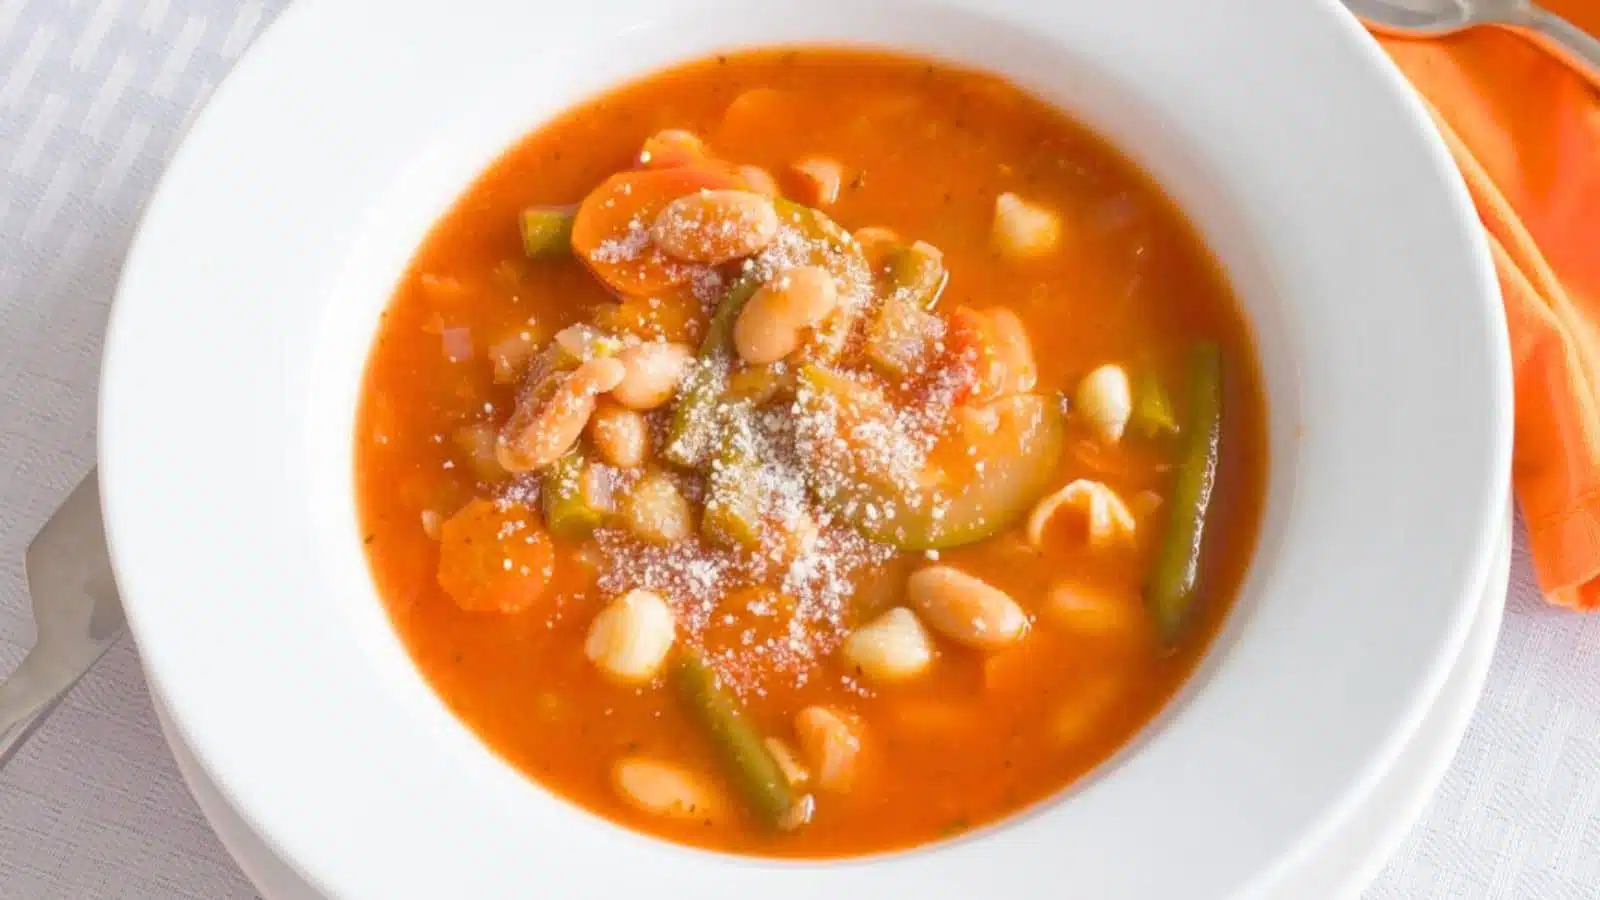 A white bowl filled with a tomato-based soup with vegetables, pasta and beans